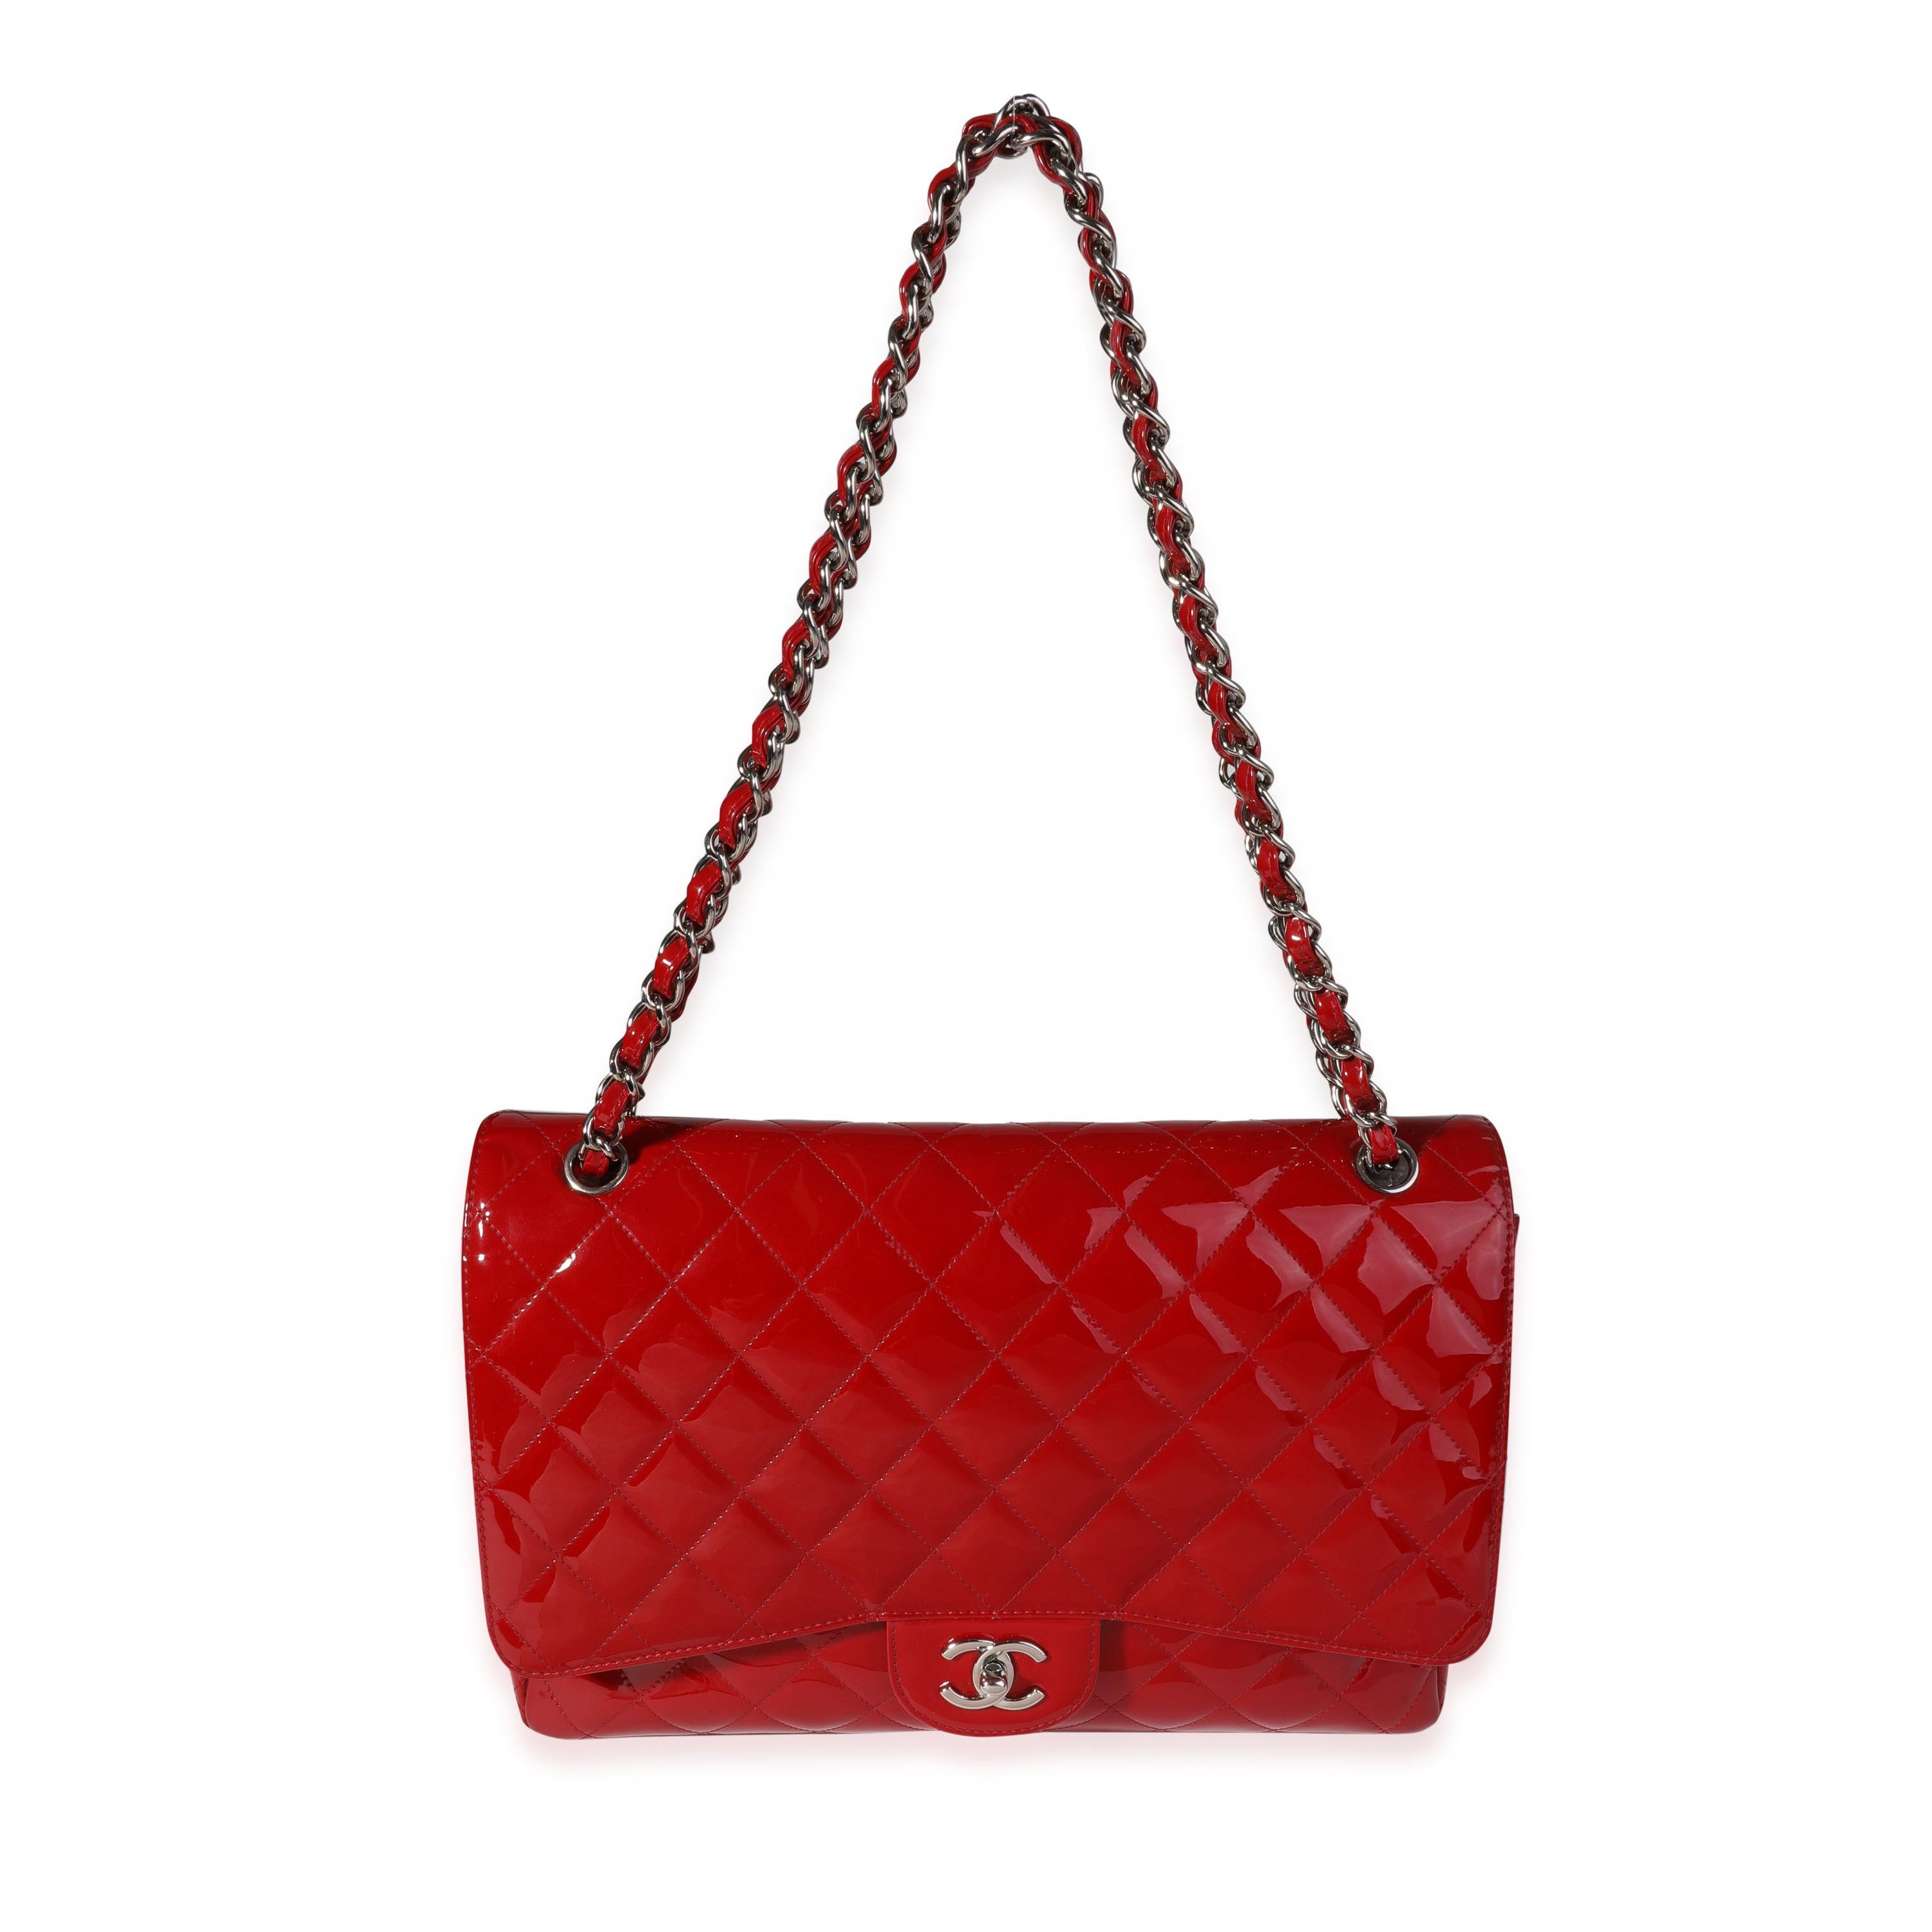 Listing Title: Chanel Red Quilted Patent Leather Maxi Classic Single Flap Bag
SKU: 121098
MSRP: 10000.00
Condition: Pre-owned 
Handbag Condition: Good
Condition Comments: Good Condition. Scuffing to corners. Scuffing and discoloration to patent.